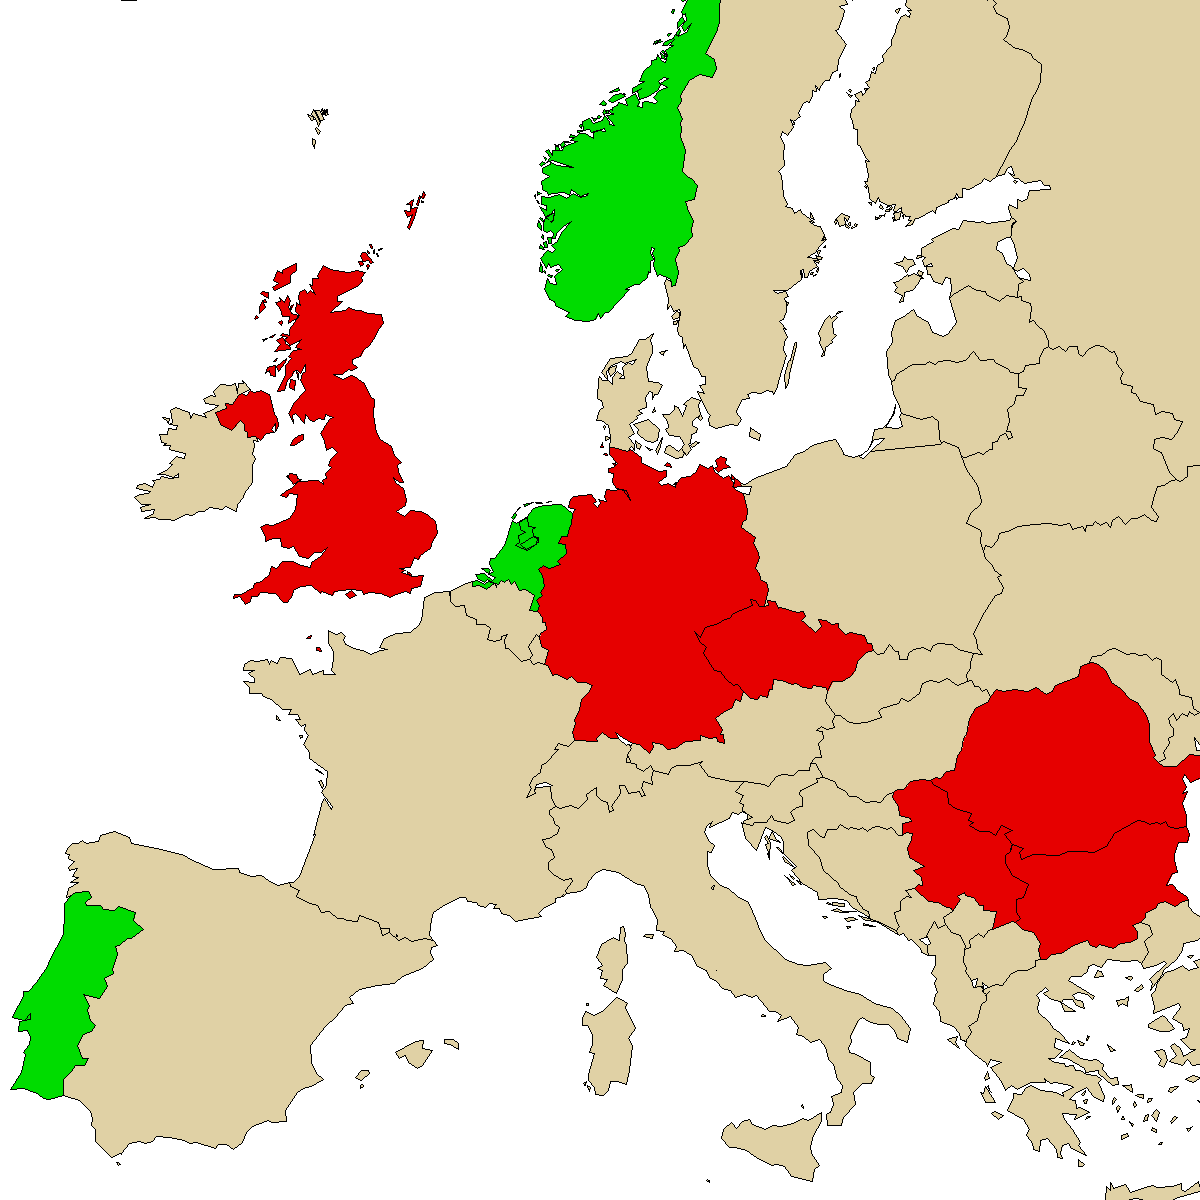 legal info map for our product 6APB, green are countries where we found no ban, red with ban, grey is unknown